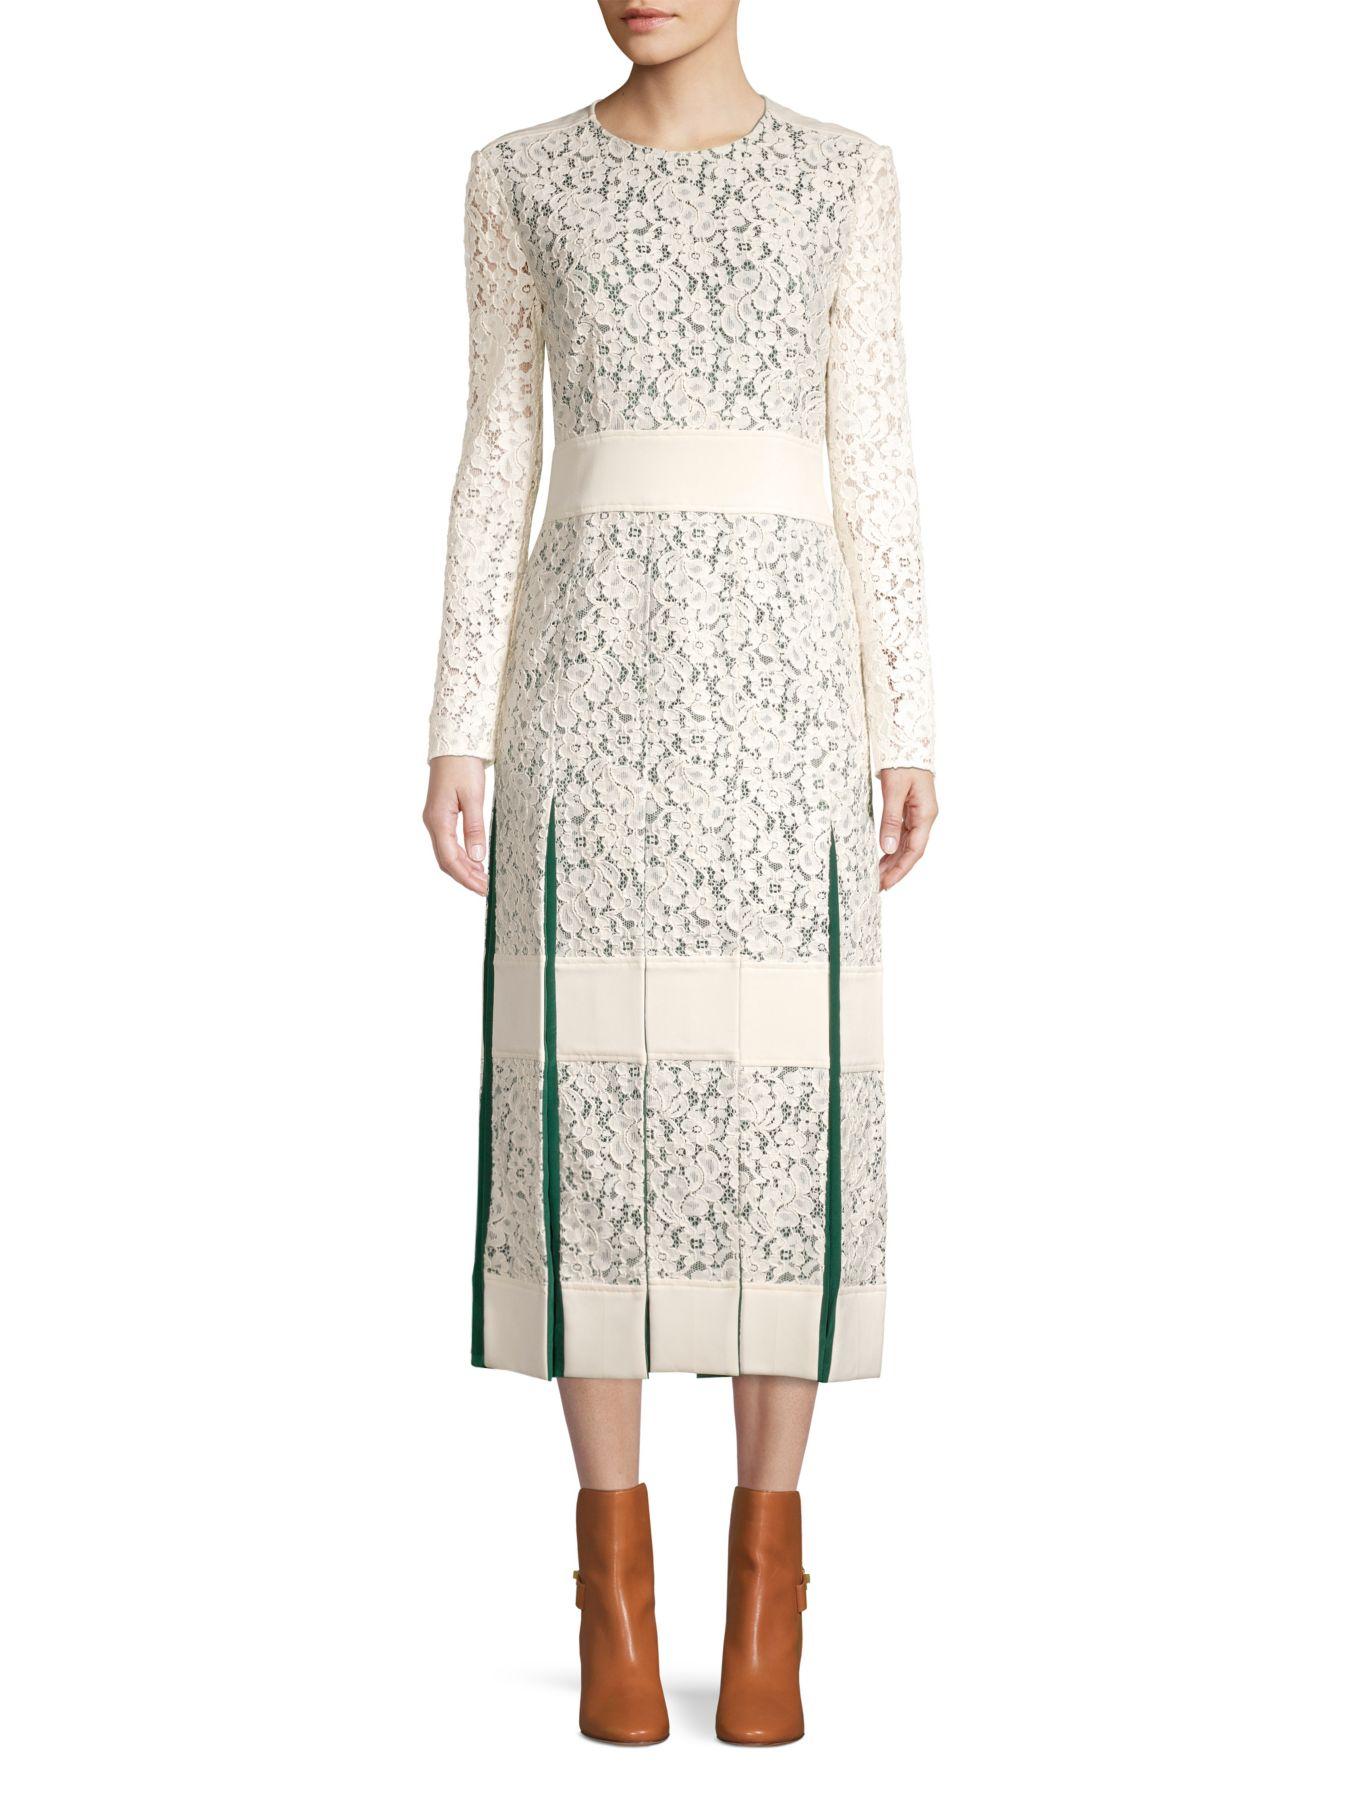 Tory Burch Satin Pleated Lace Dress in ...